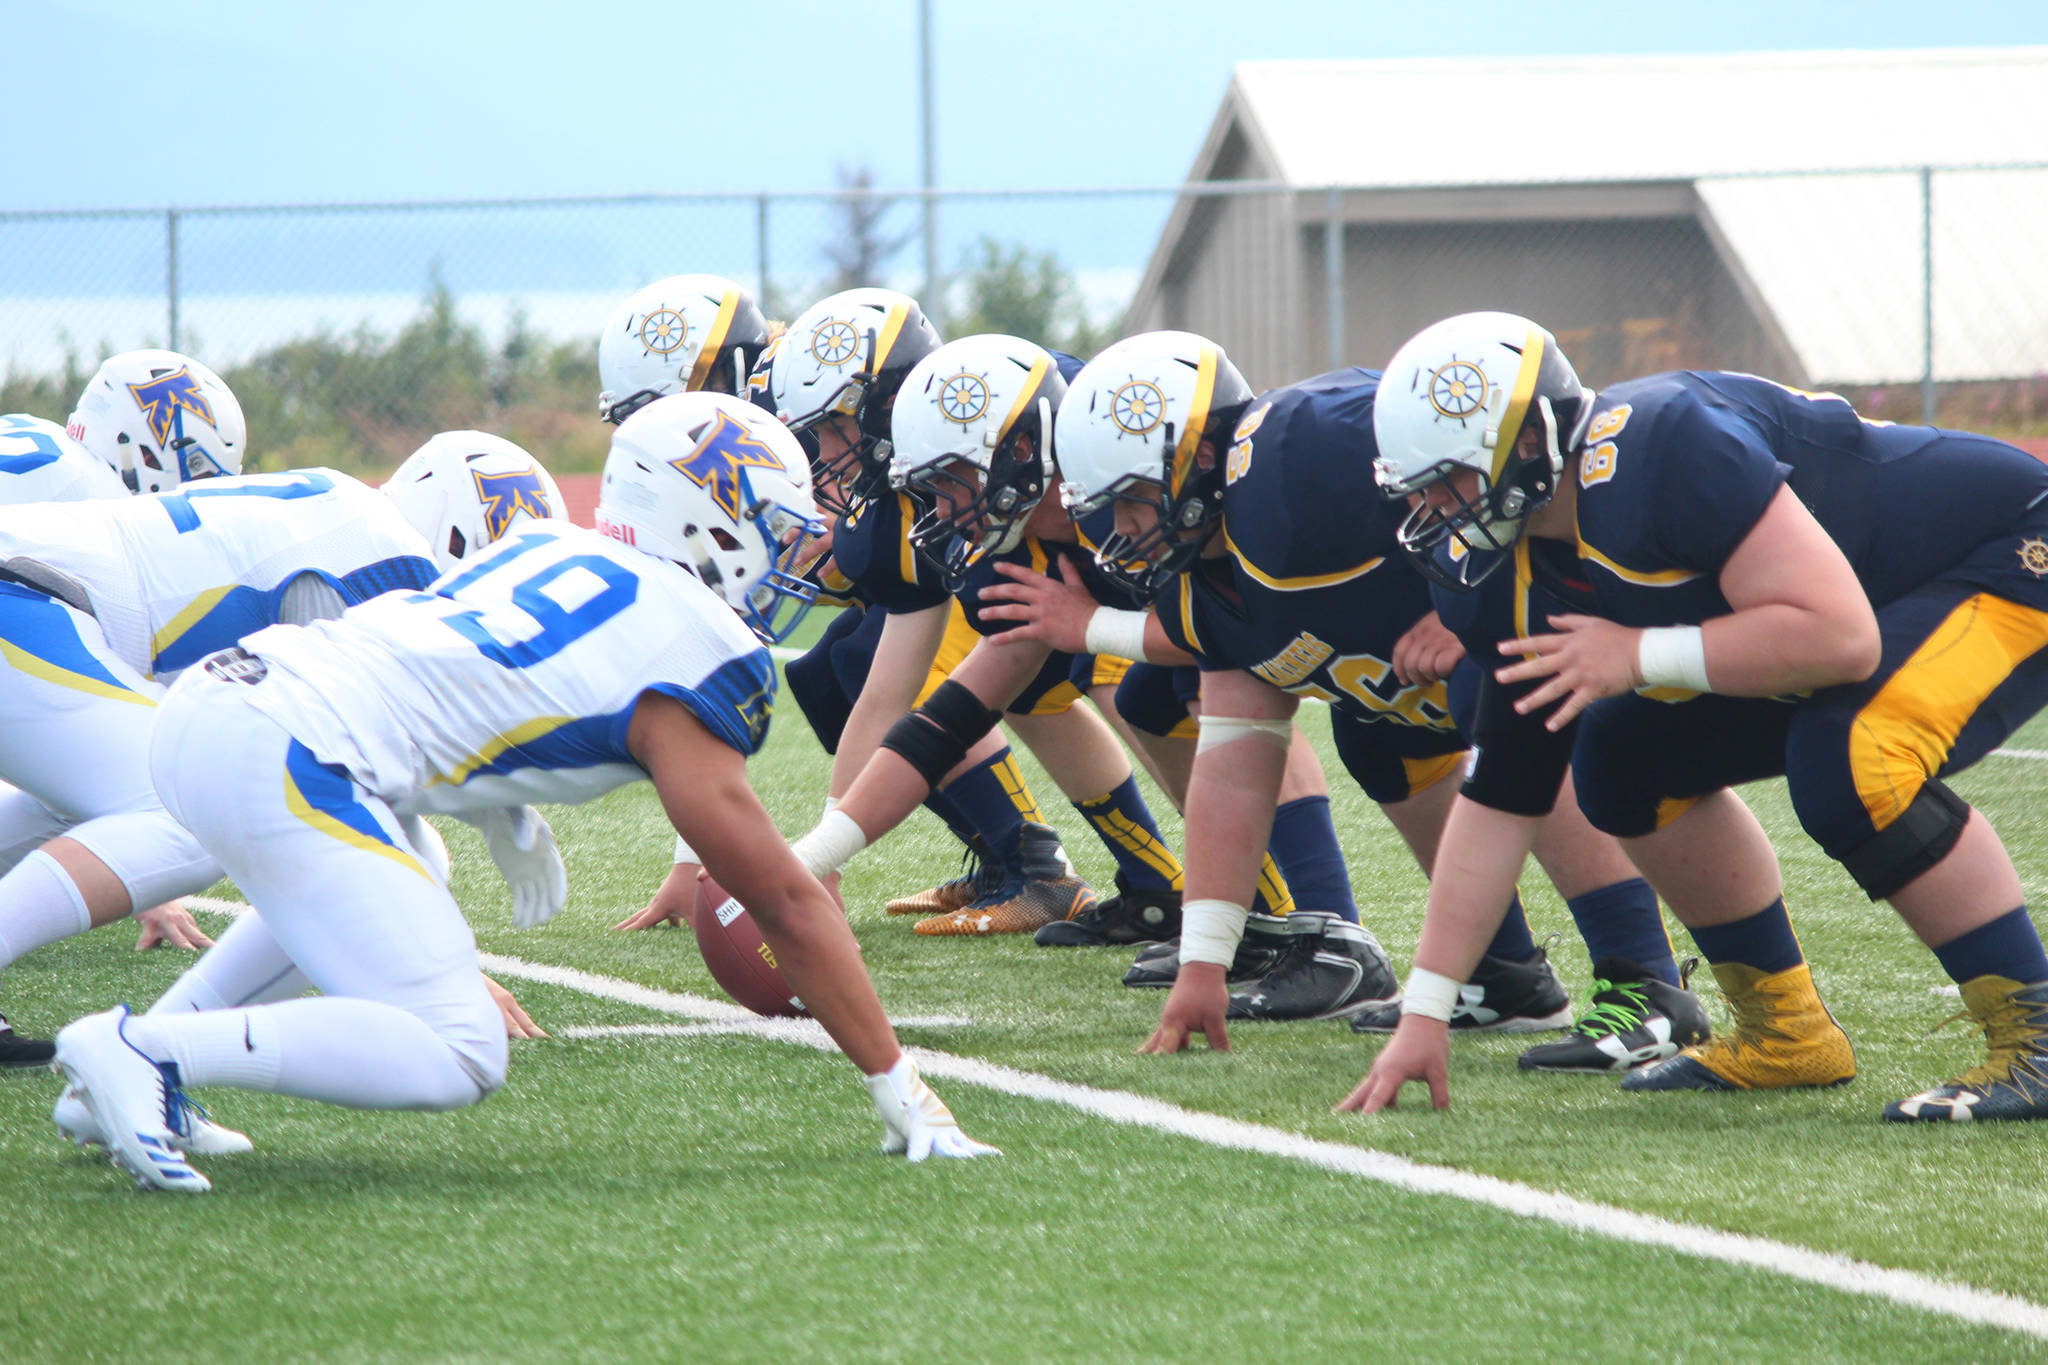 Members of the Homer Mariners varsity football team face off against those from Kodiak High School during their game Saturday, Aug. 12, 2017 at Homer High School in Homer, Alaska. Kodiak defeated the Mariners 21-8. (Photo by Megan Pacer/Homer News)